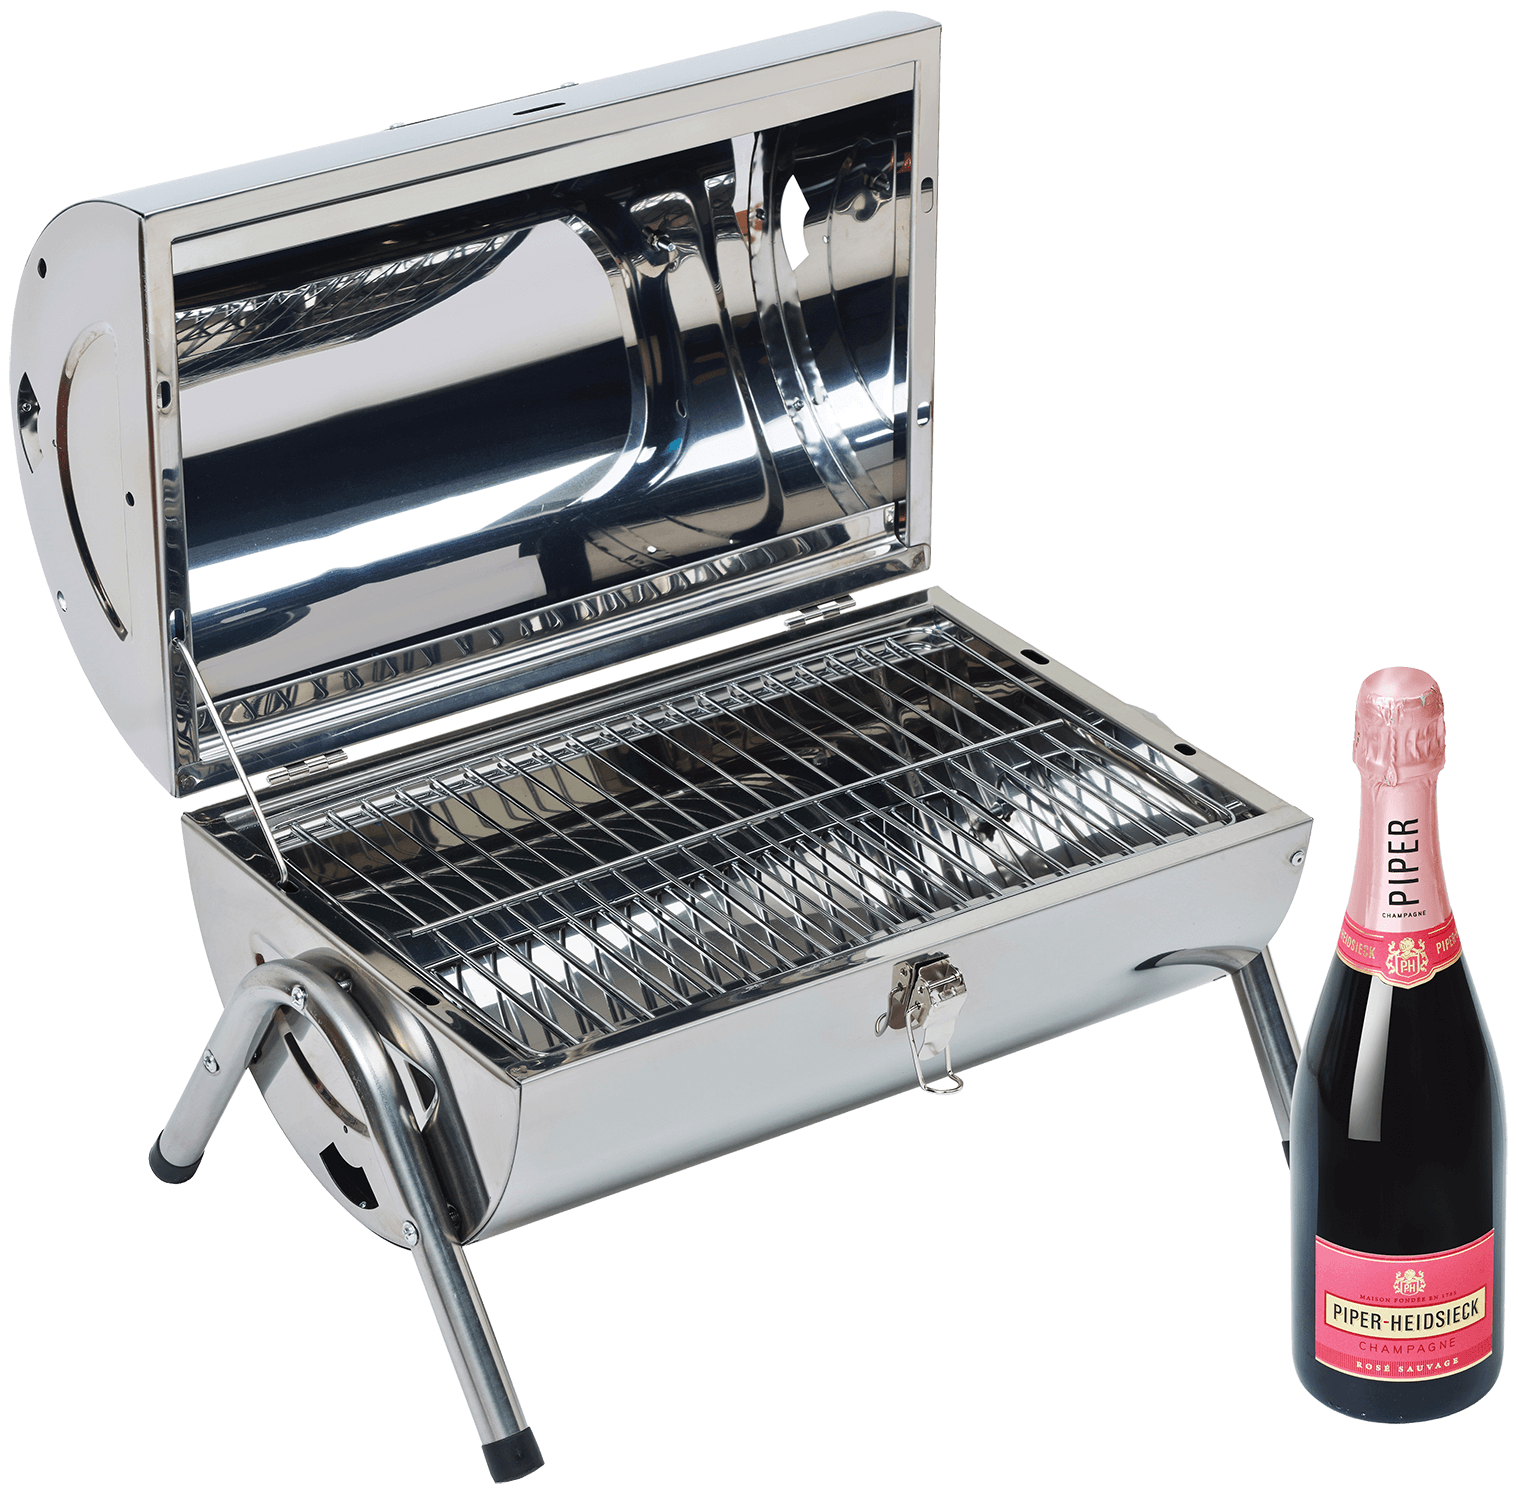 Piper-Heidsieck Sauvage Rose Brut Champagne AOC (gift box BBQ) piper heidsieck brut champagne aoc